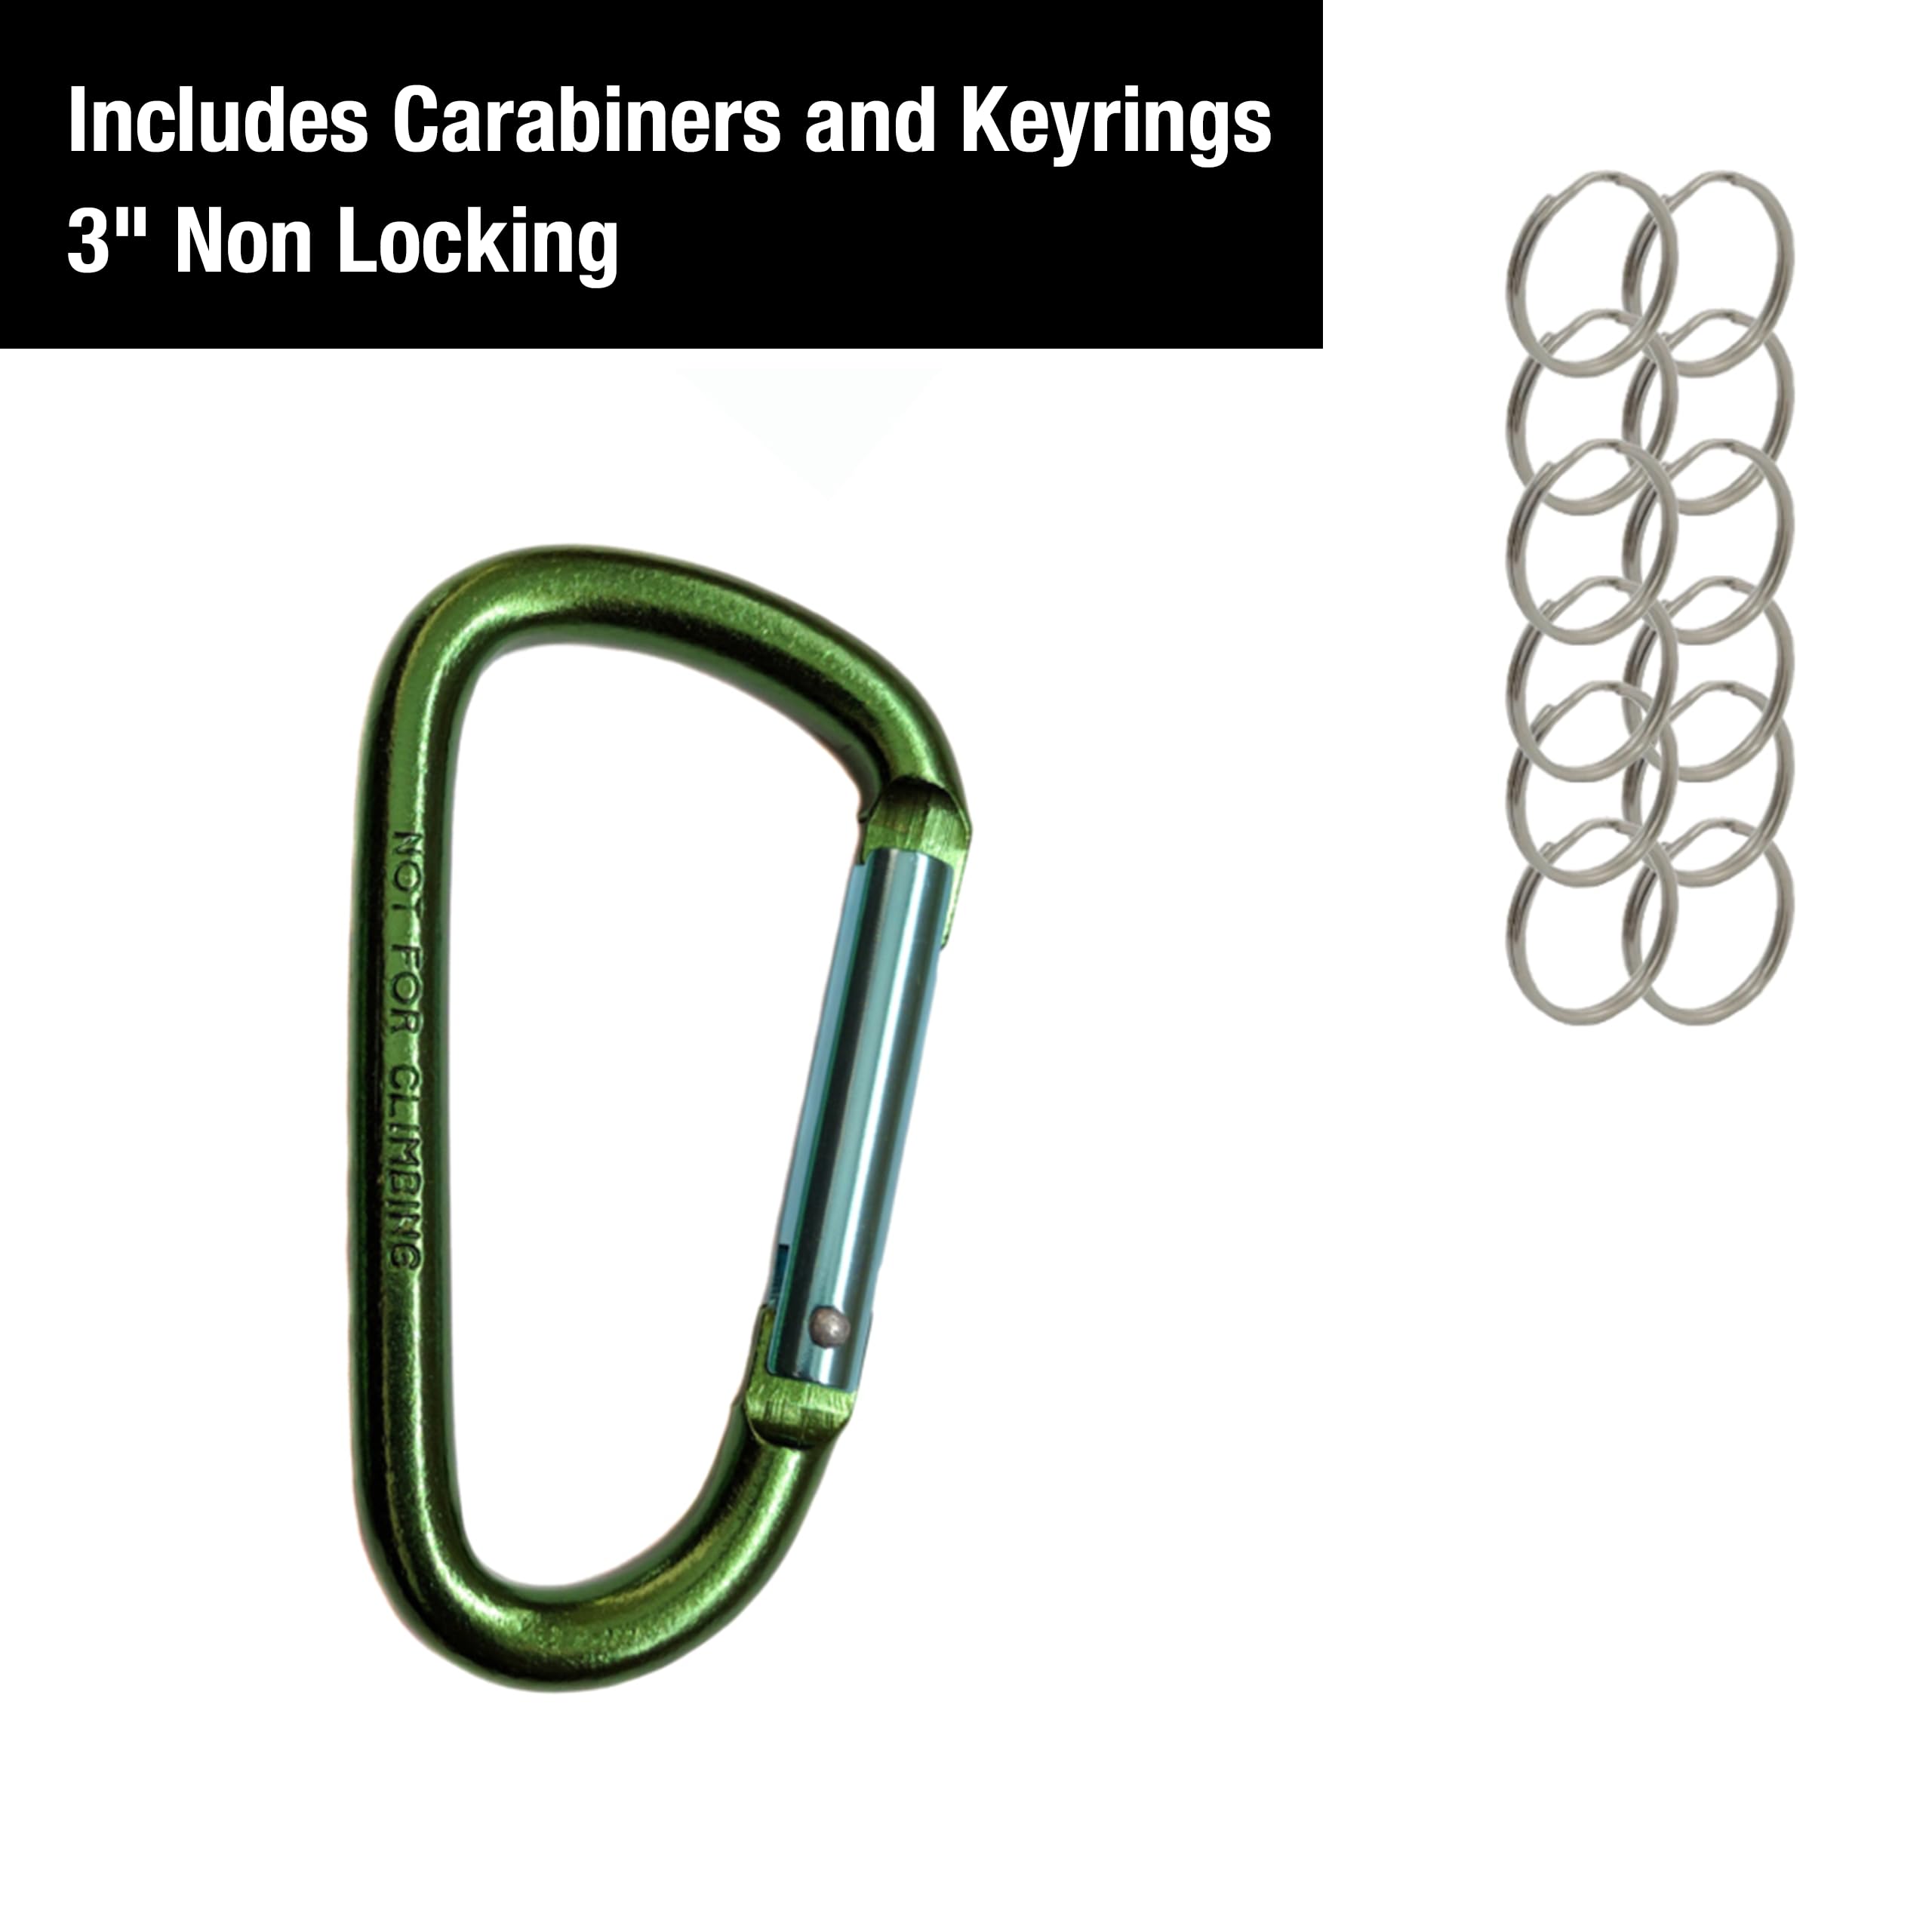 12-Pack Aluminum Carabiner - 3 Inch, Green Carabiners - D Shape Heavy Duty Buckle Carabiner Clips - Small Carabiner Clip